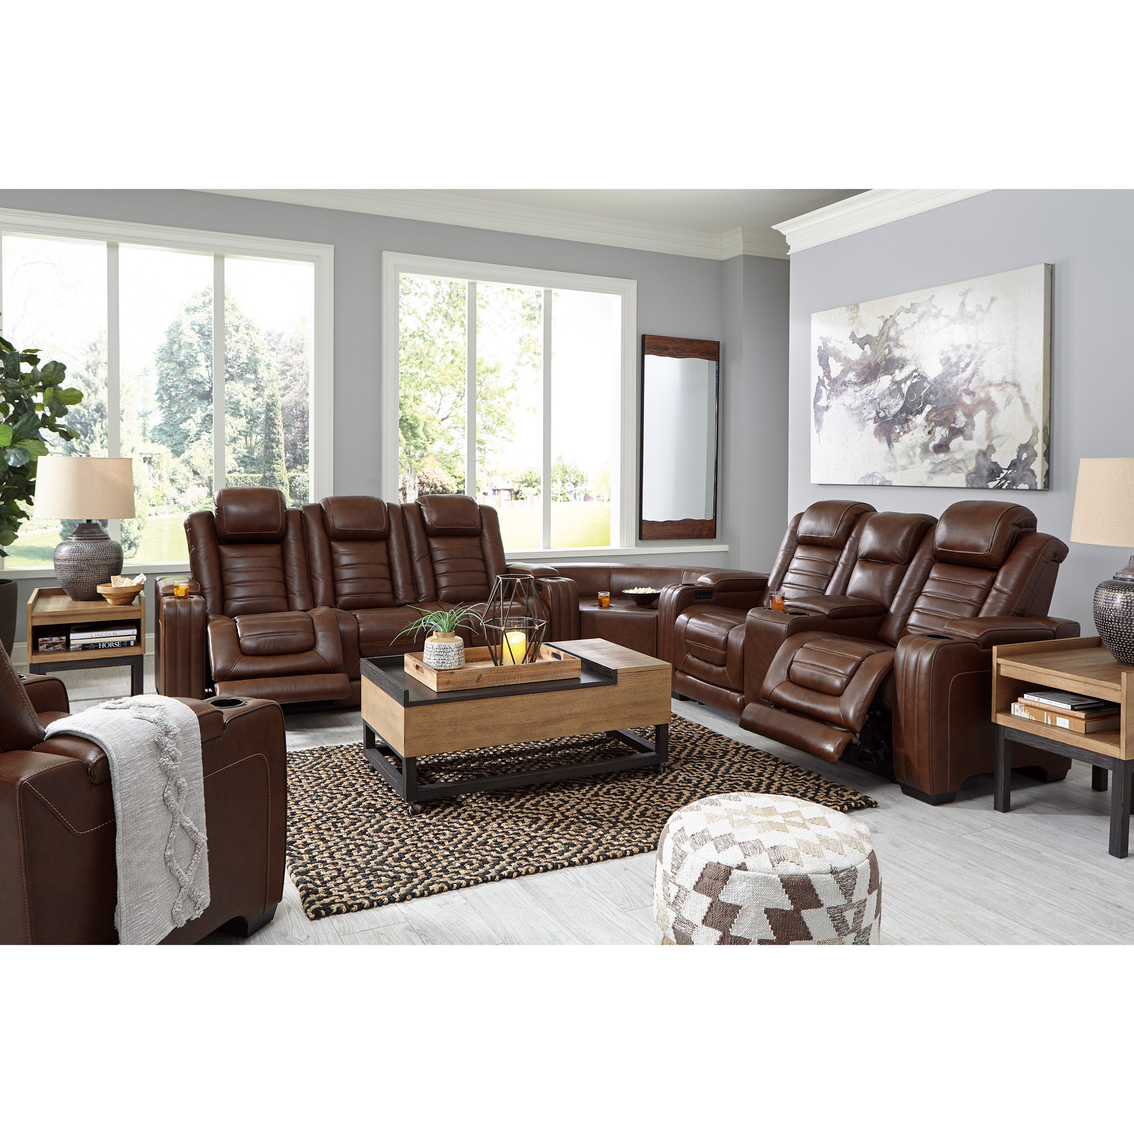 Signature Design by Ashley Backtrack Power Reclining Loveseat with Console - Image 7 of 10